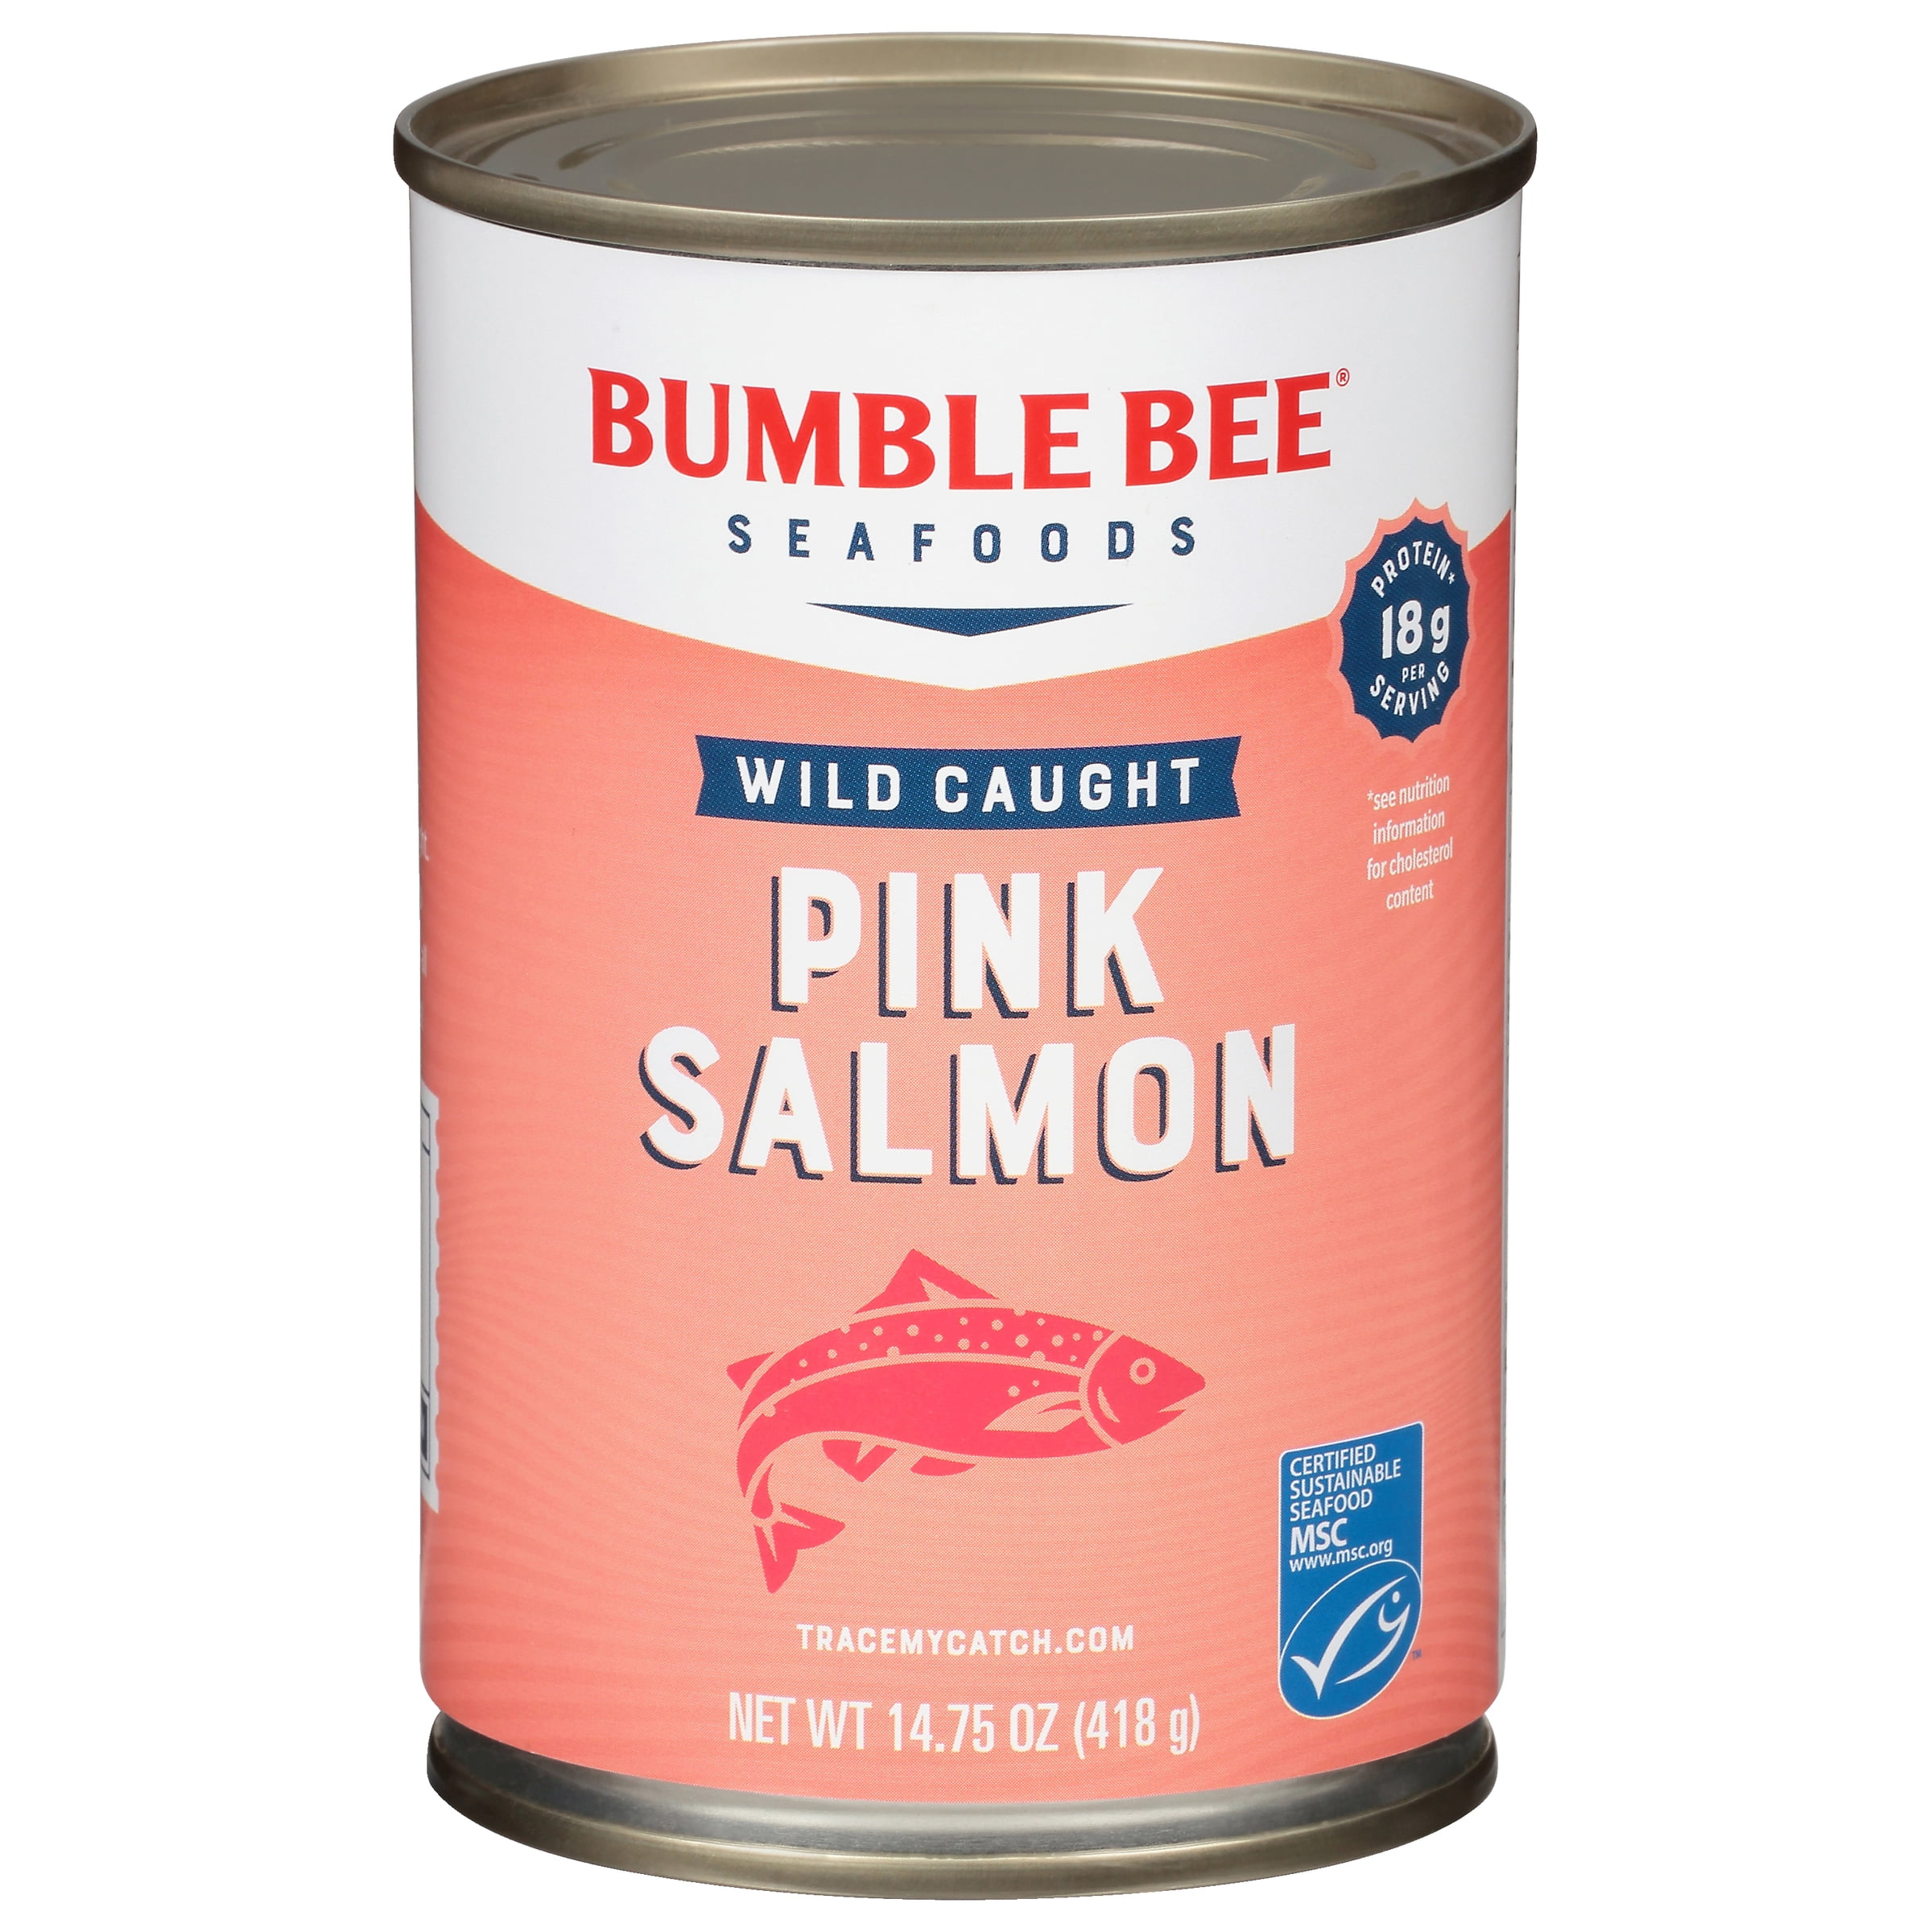 Ble Bee Canned Pink Salmon 14 75 Oz